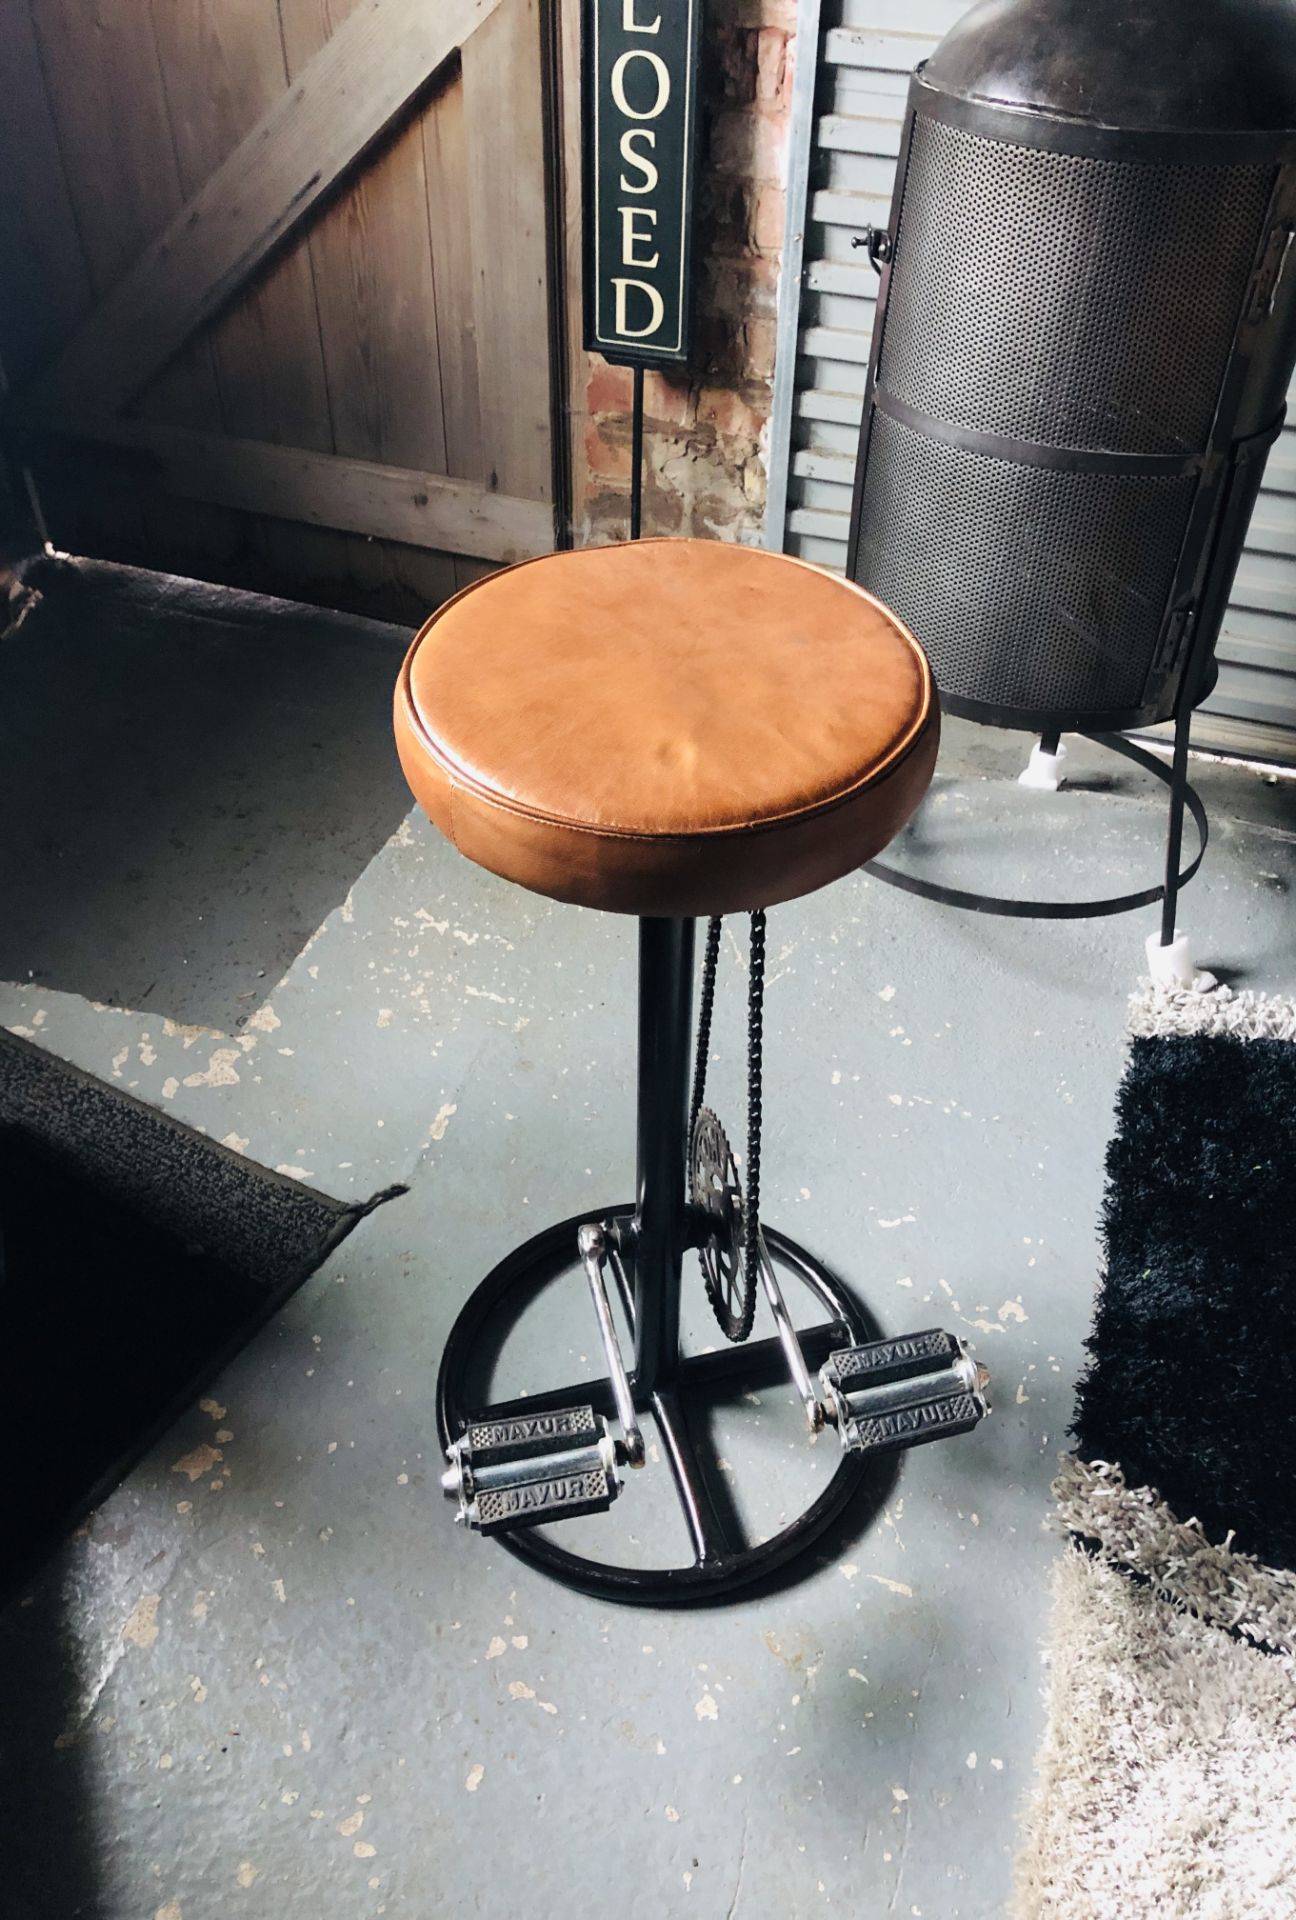 1 X VINTAGE INDUSTRIAL STYLE BAR STOOL WITH CHAIN AND PEDALS